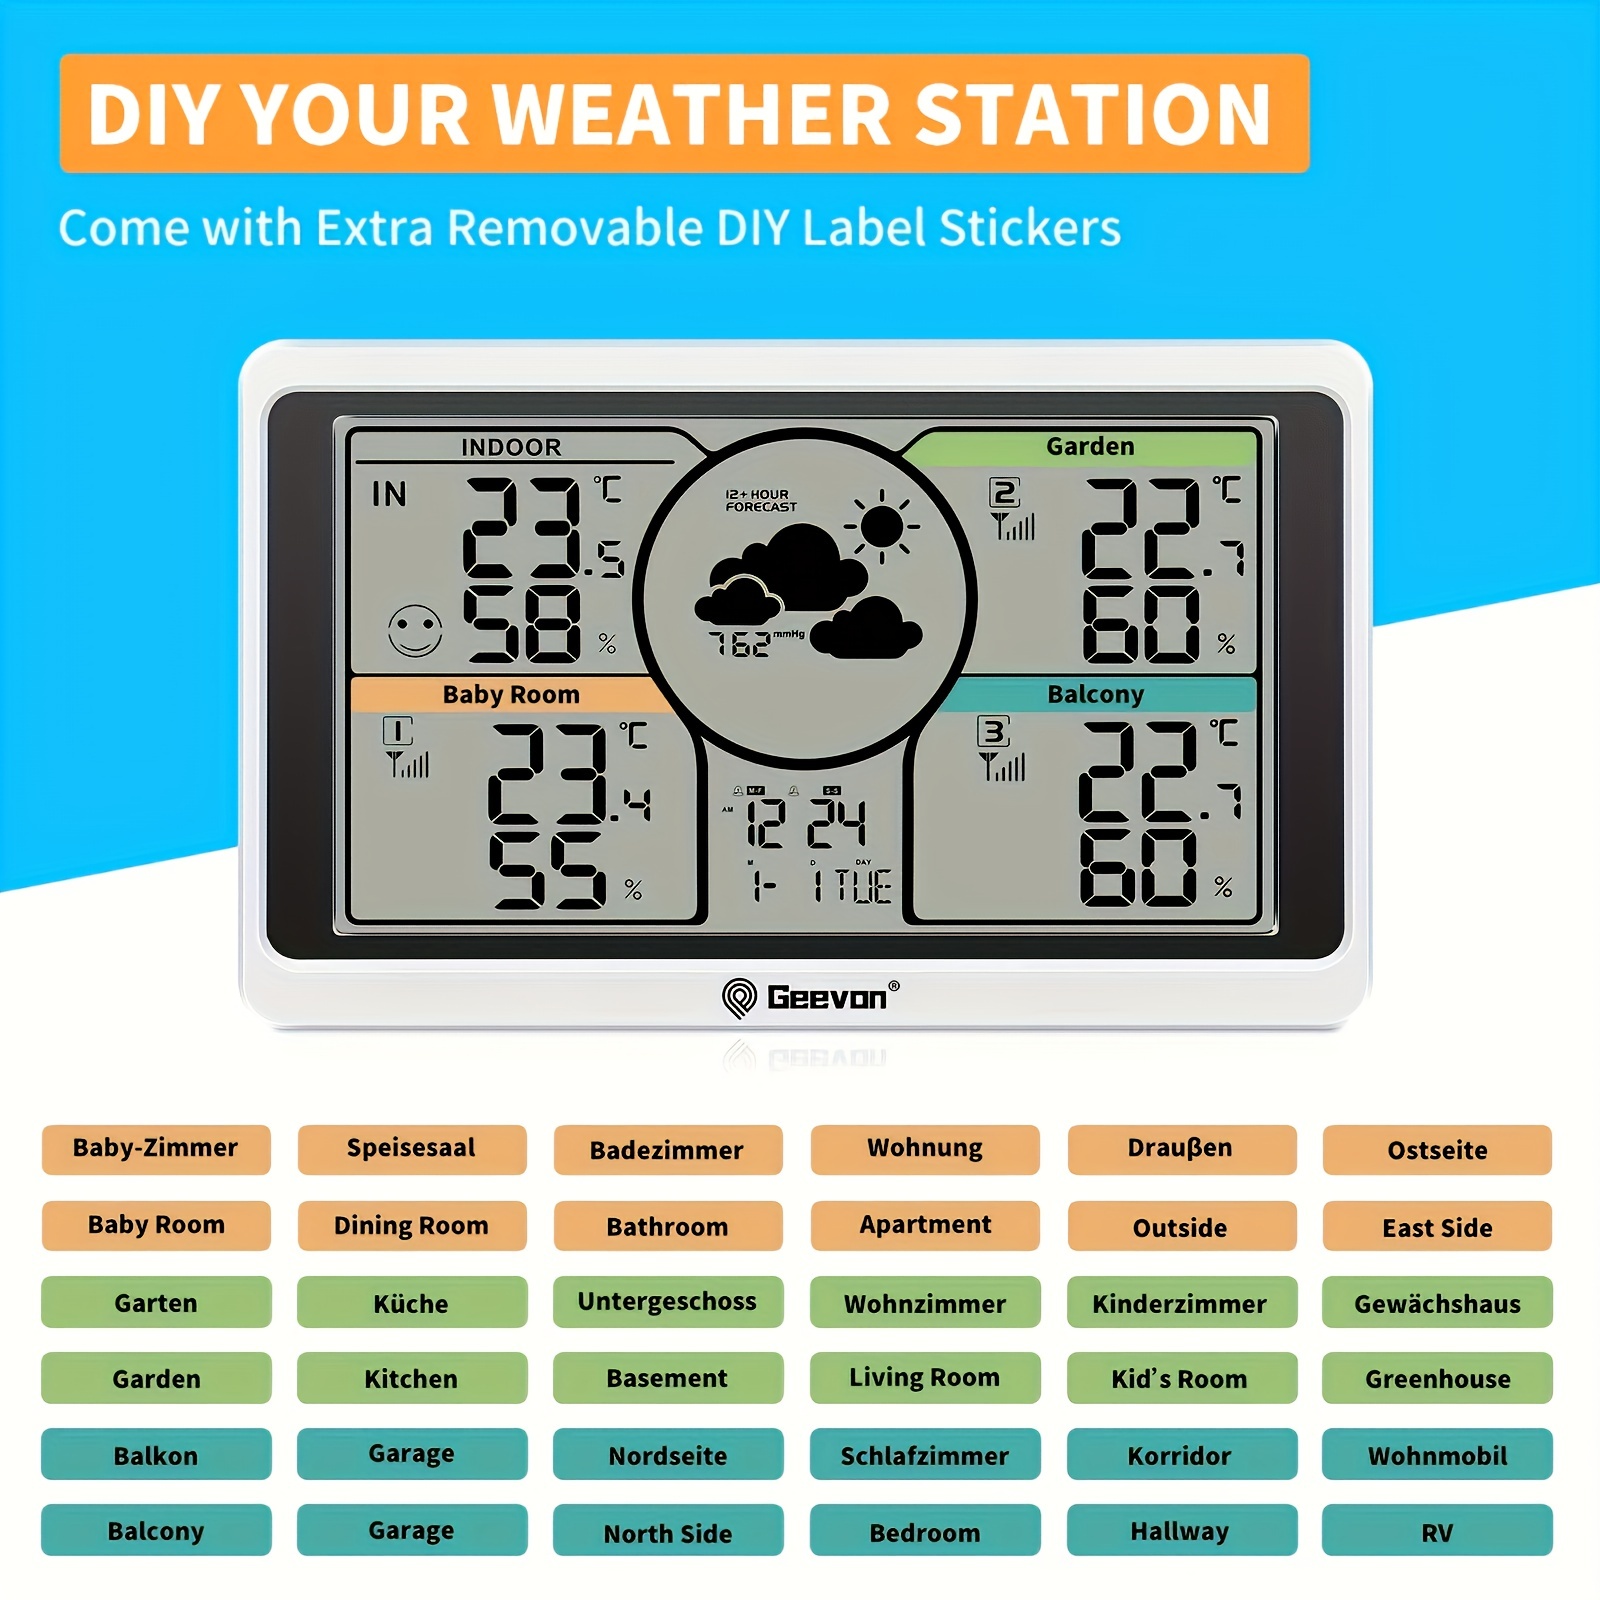 Newentor Weather Station Wireless Indoor Outdoor Multiple Sensors, Digital  Atomic Clock Weather Thermometer, Temperature and Humidity Monitor